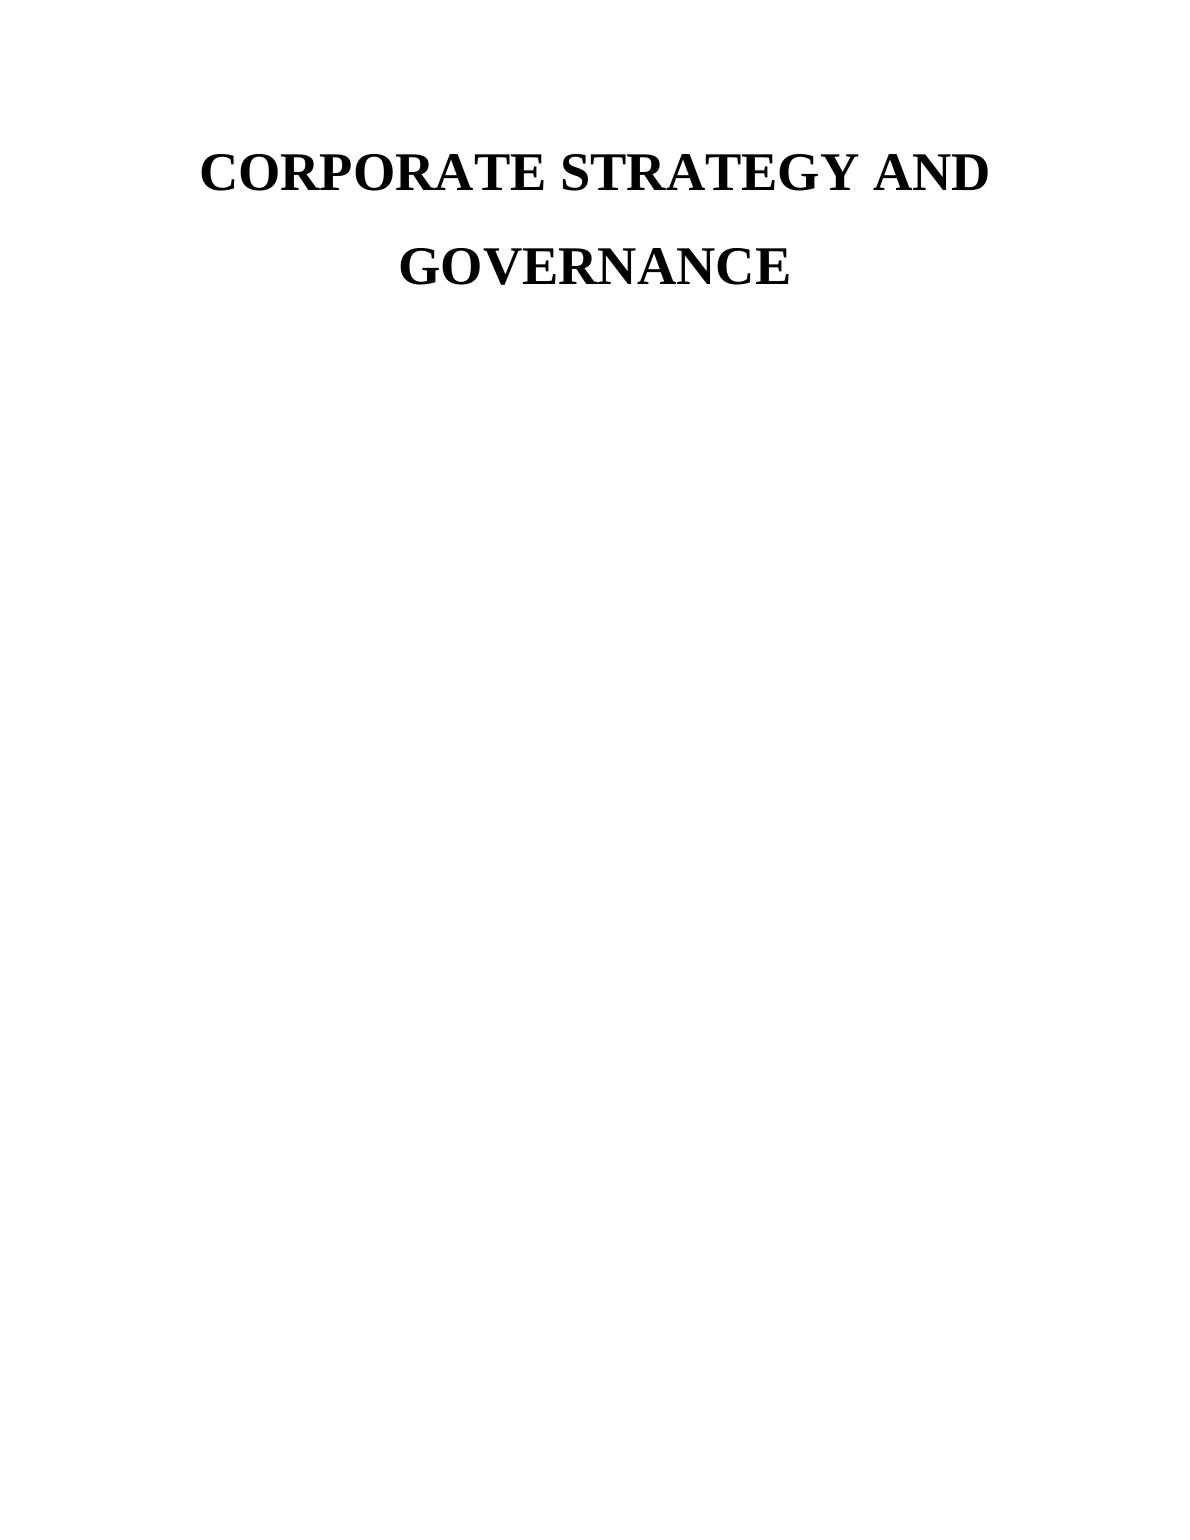 corporate strategy and governance assignment